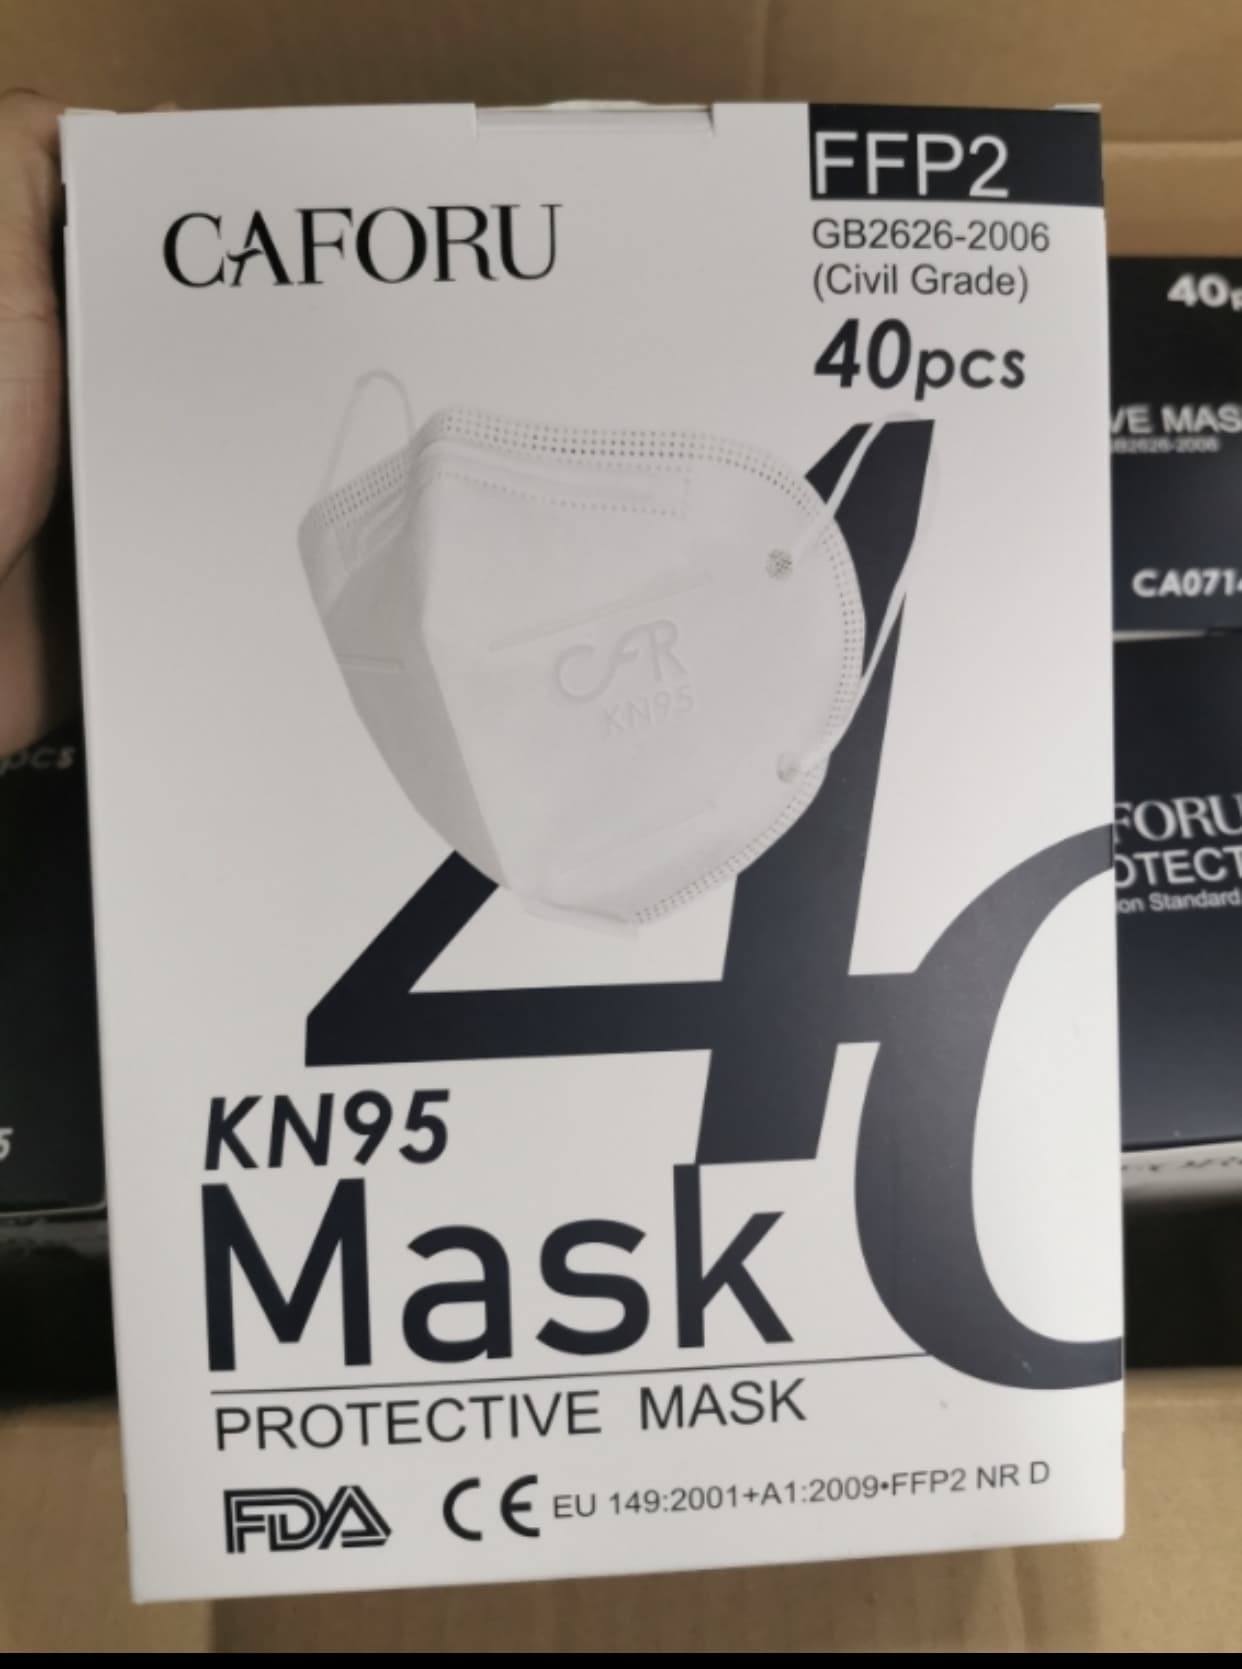 KN95 FACE MASK